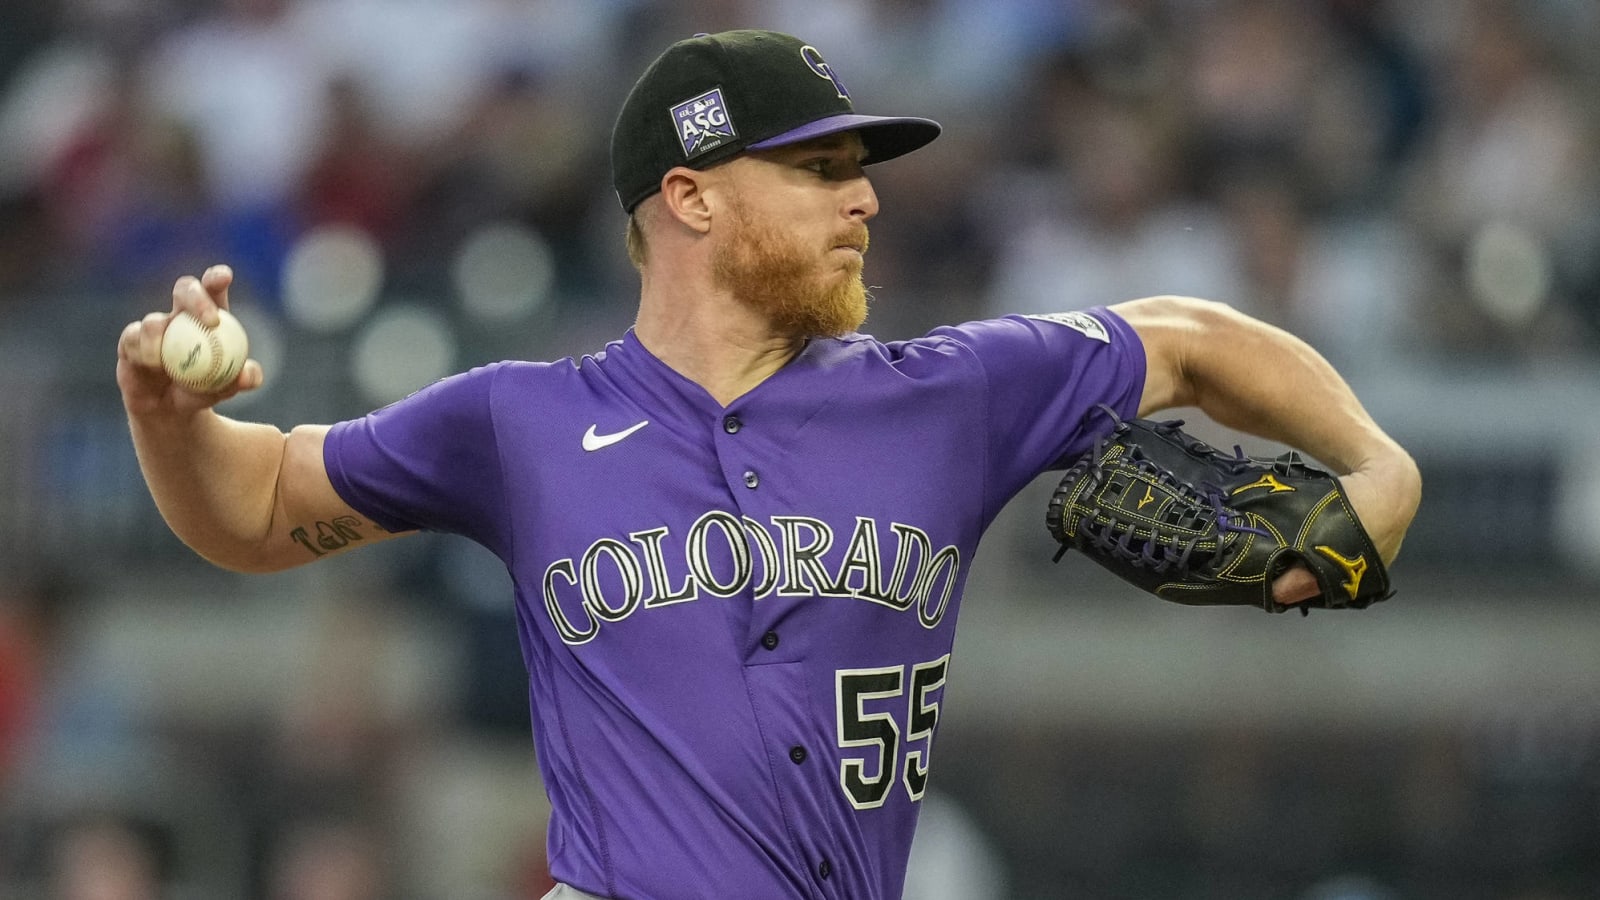 Rockies’ extension offer to Jon Gray was in $35M to $40M range